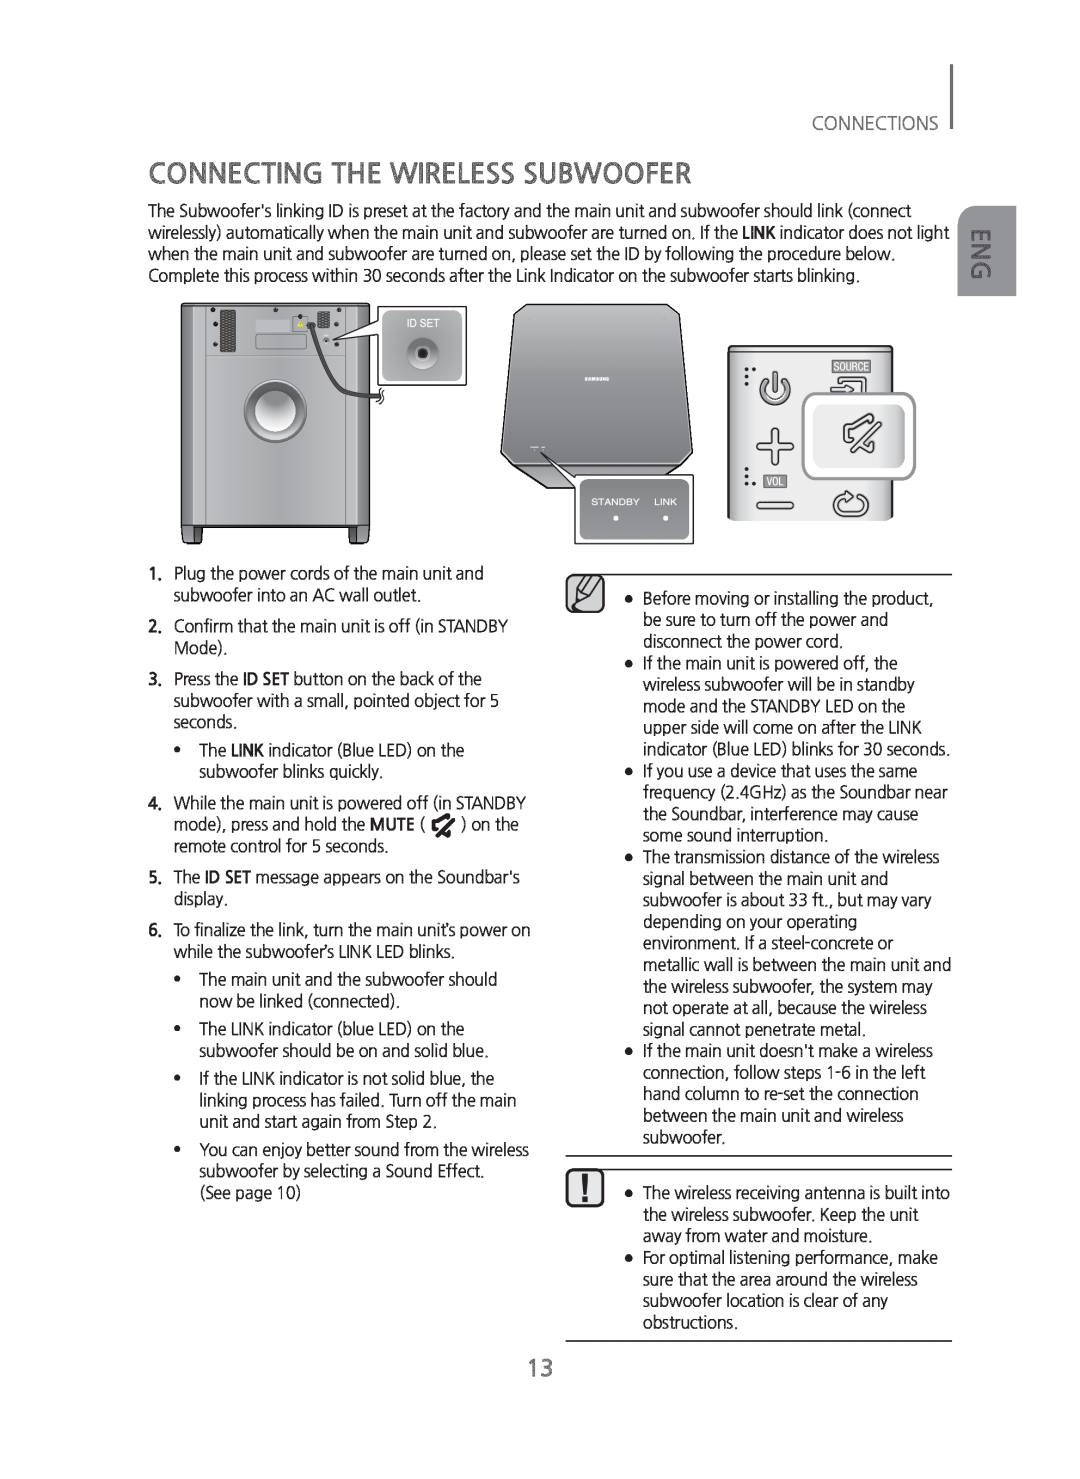 Samsung HW-H750/ZA manual Connecting The Wireless Subwoofer, Connections 